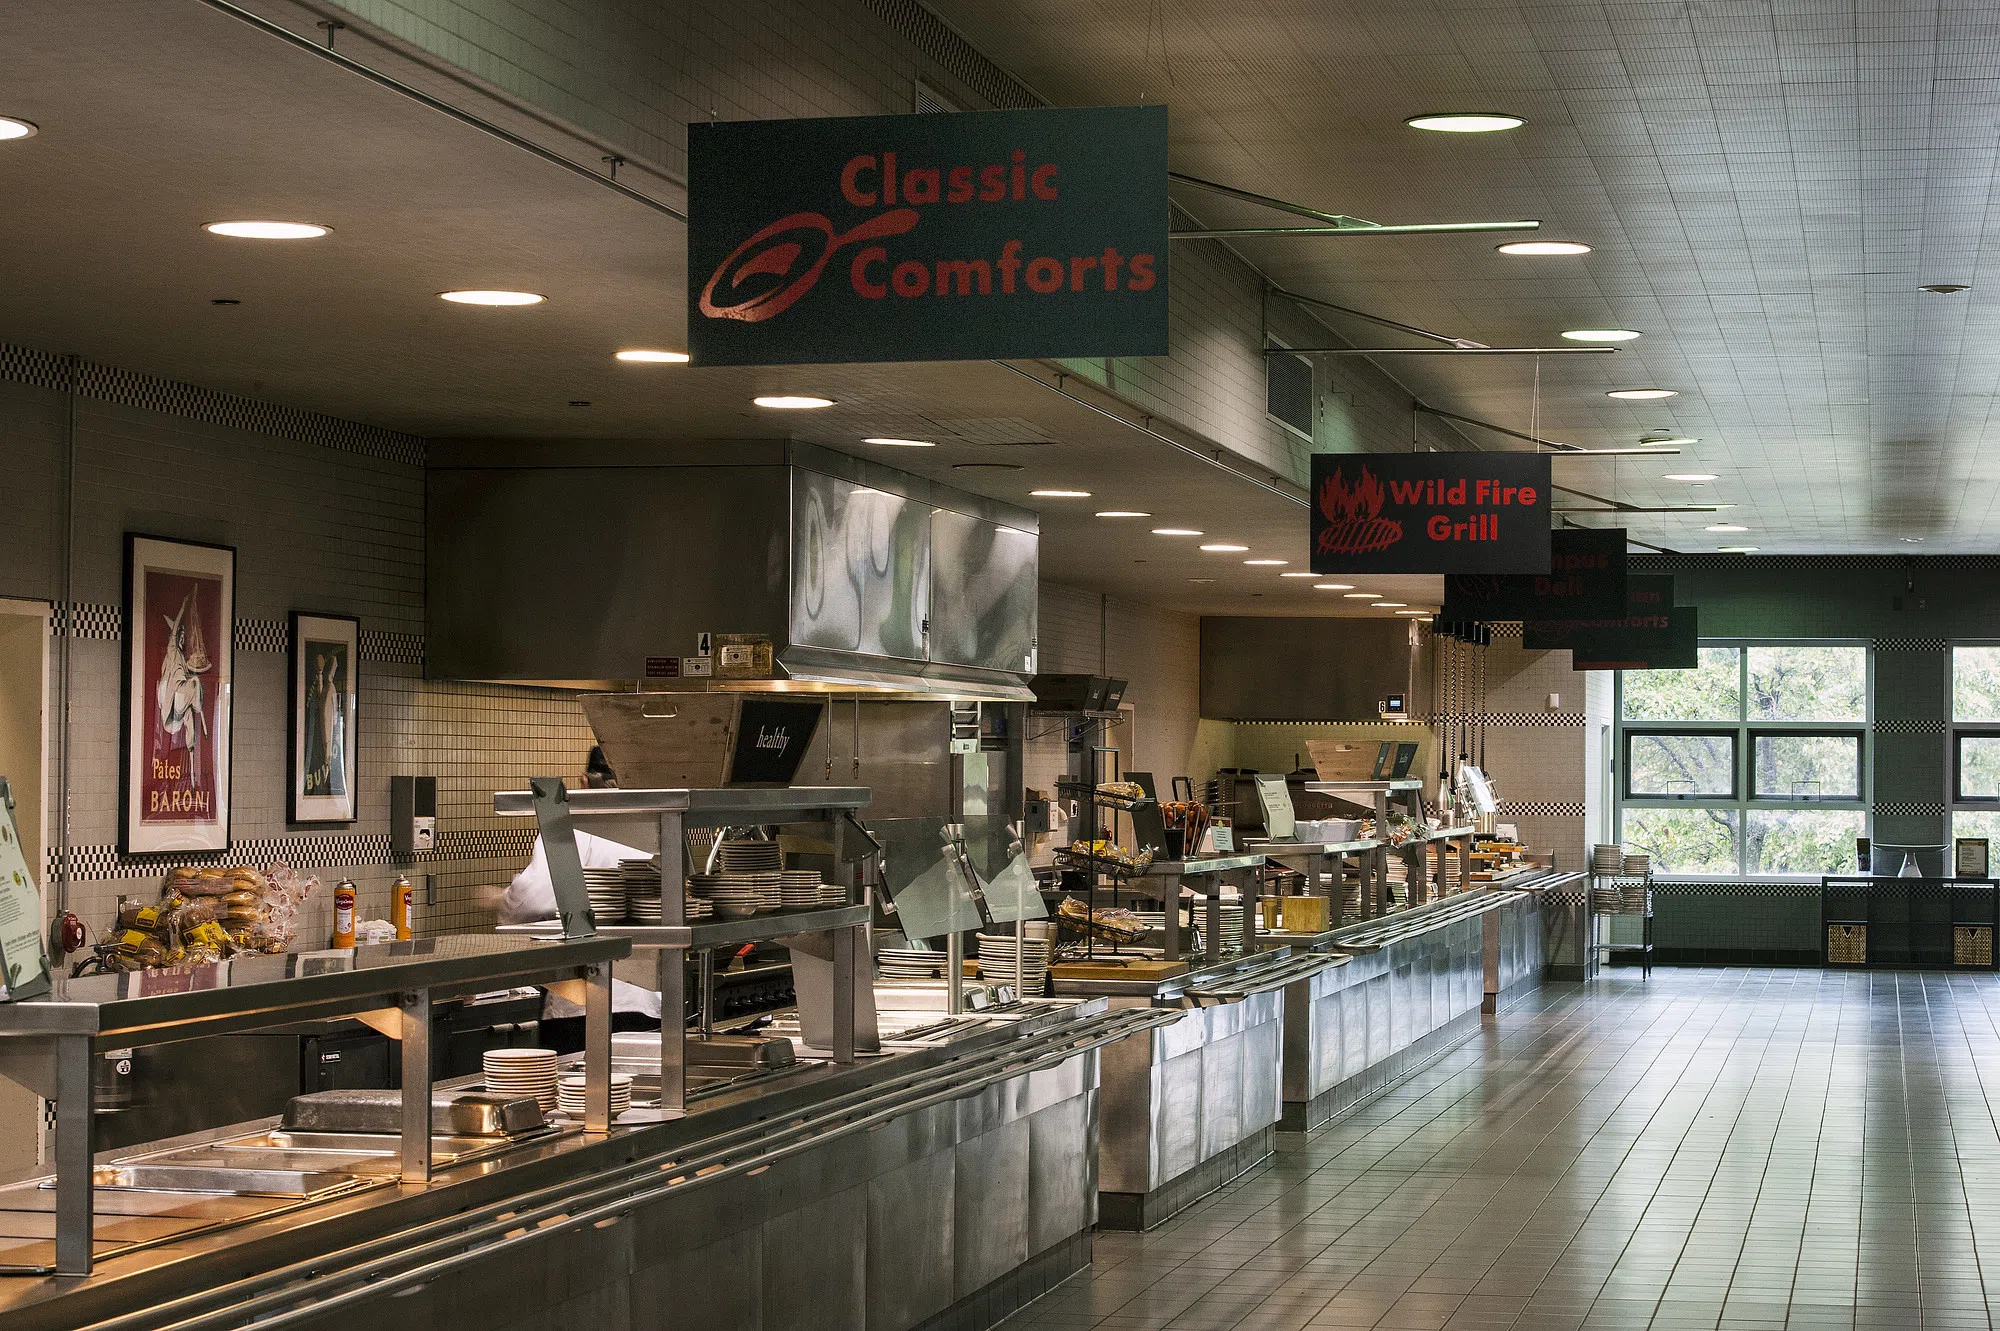 A image that shows off Stevenson Dining Hall's various food stations including, "Classic Comforts", "Wild Fire Grill", and more.